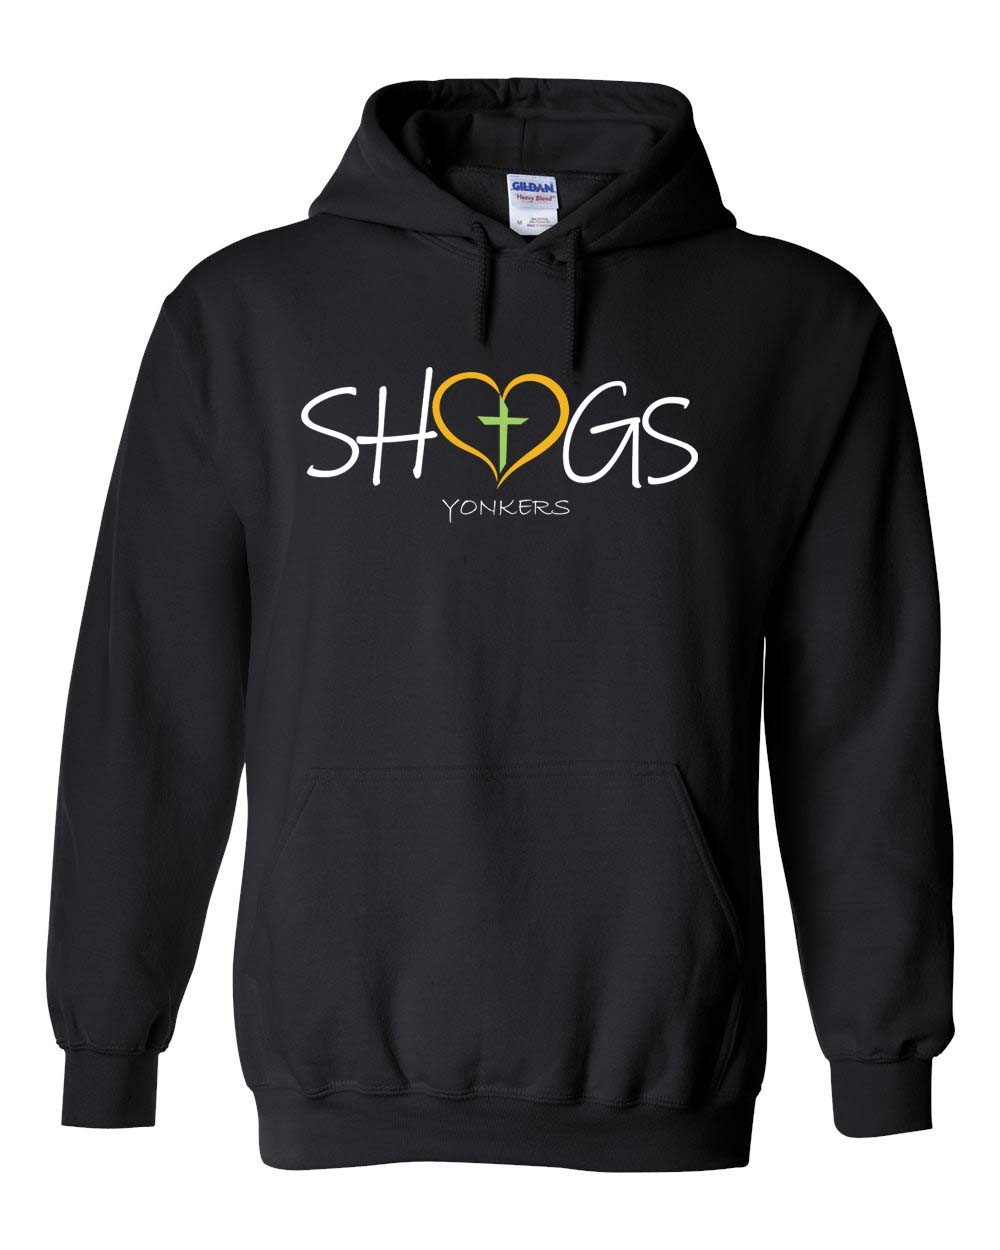 STAFF SHGS Pullover Hoodie w/ Heart Logo - Please Allow 2-3 Weeks for Delivery